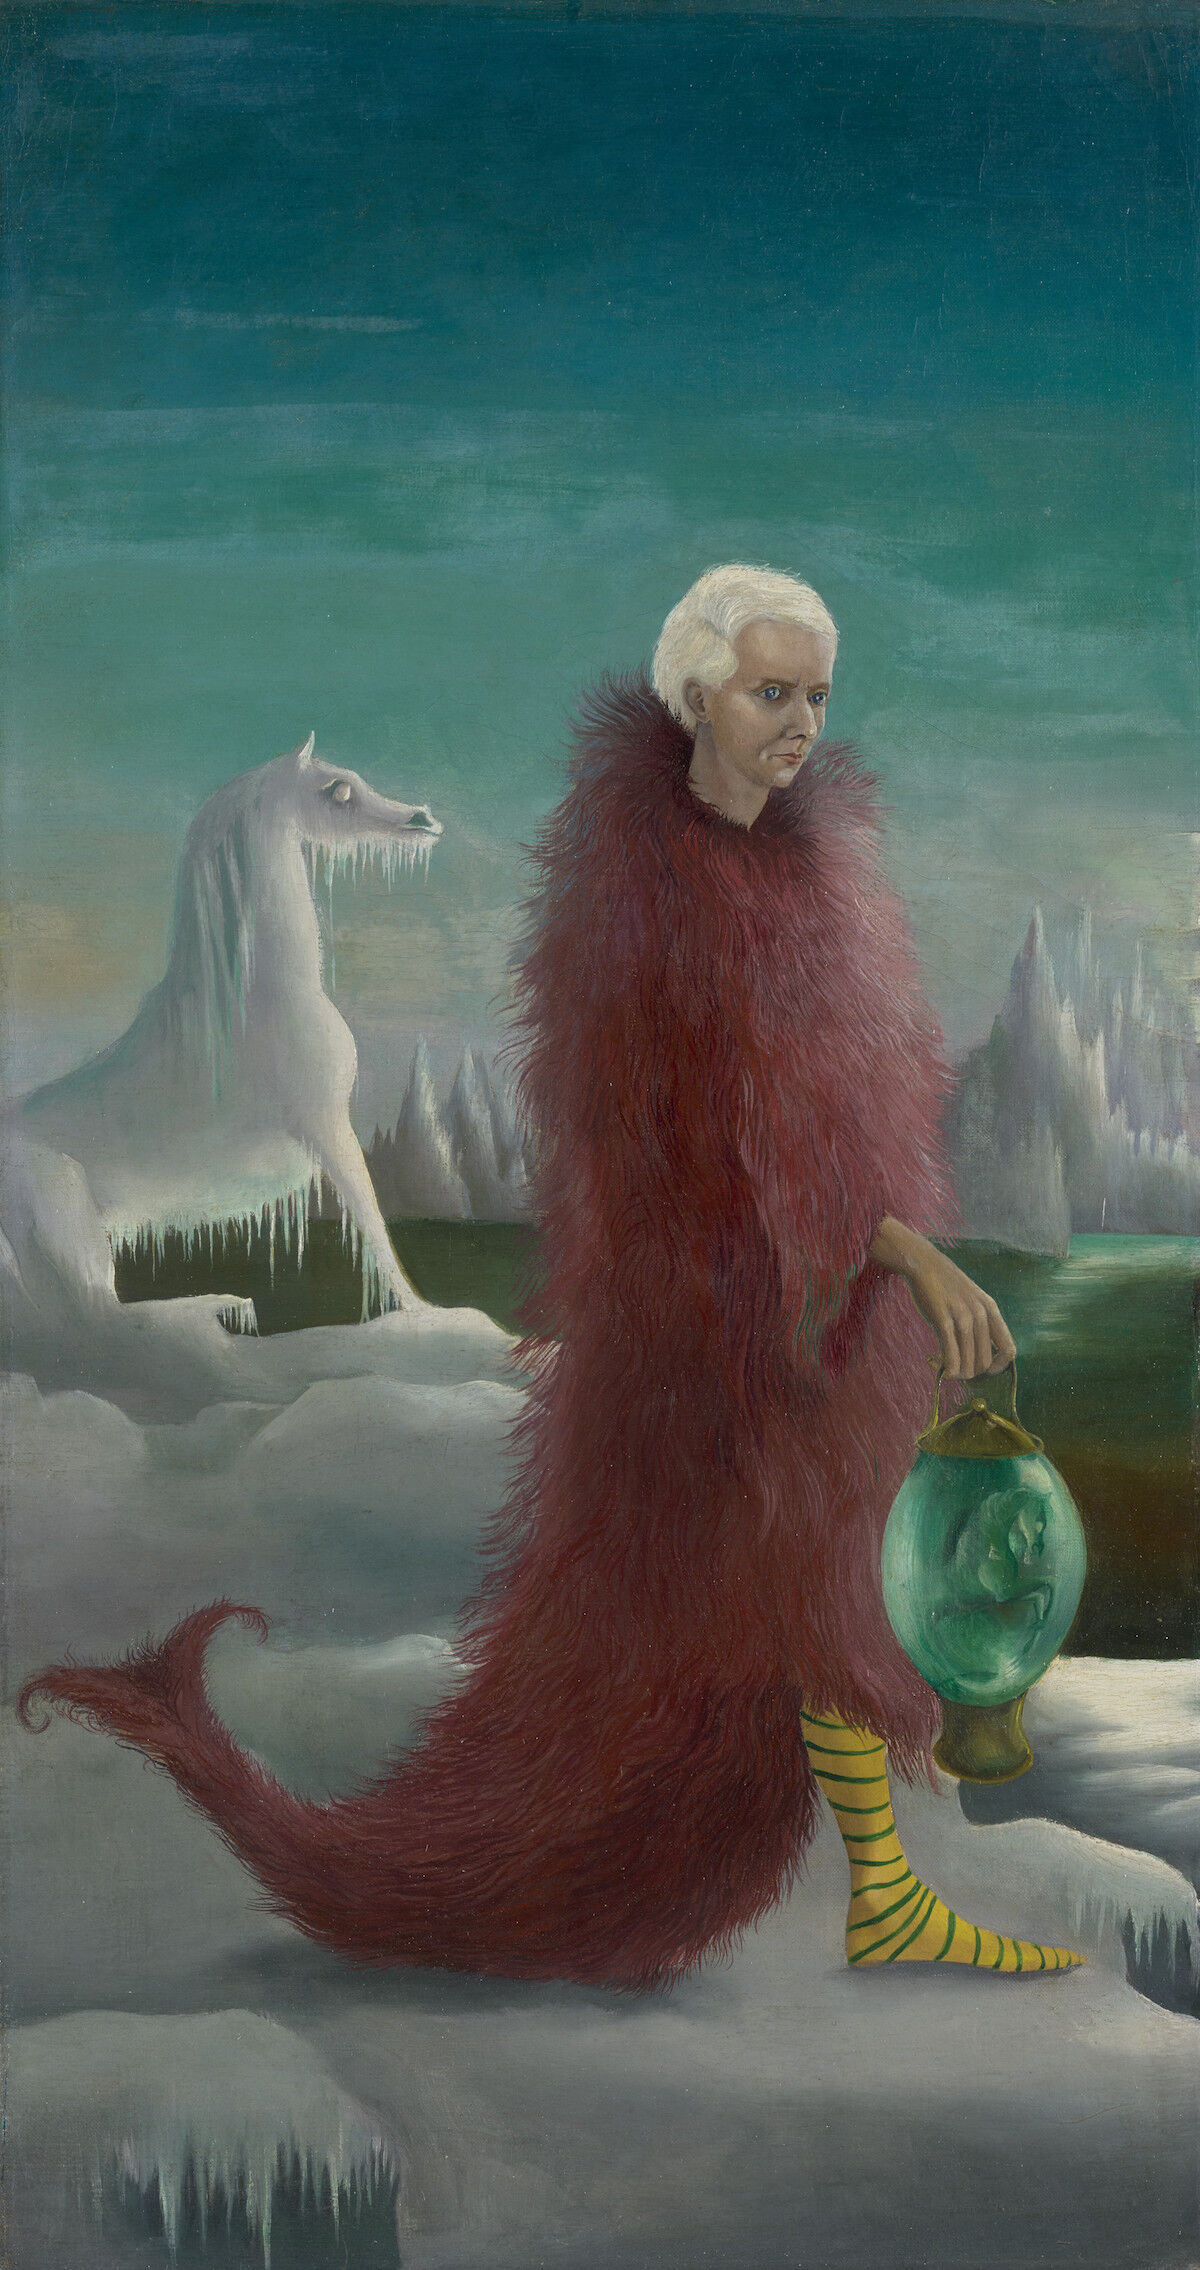 Leonora Carrington, Portrait of Max Ernst, circa 1939, &nbsp;oil on canvas, 50.3 x 26.8 cm, 19.8 x 10.6 in. Courtesy of the National Galleries of Scotland, copyright the estate of Leonora Carrington, DACS, 2018.